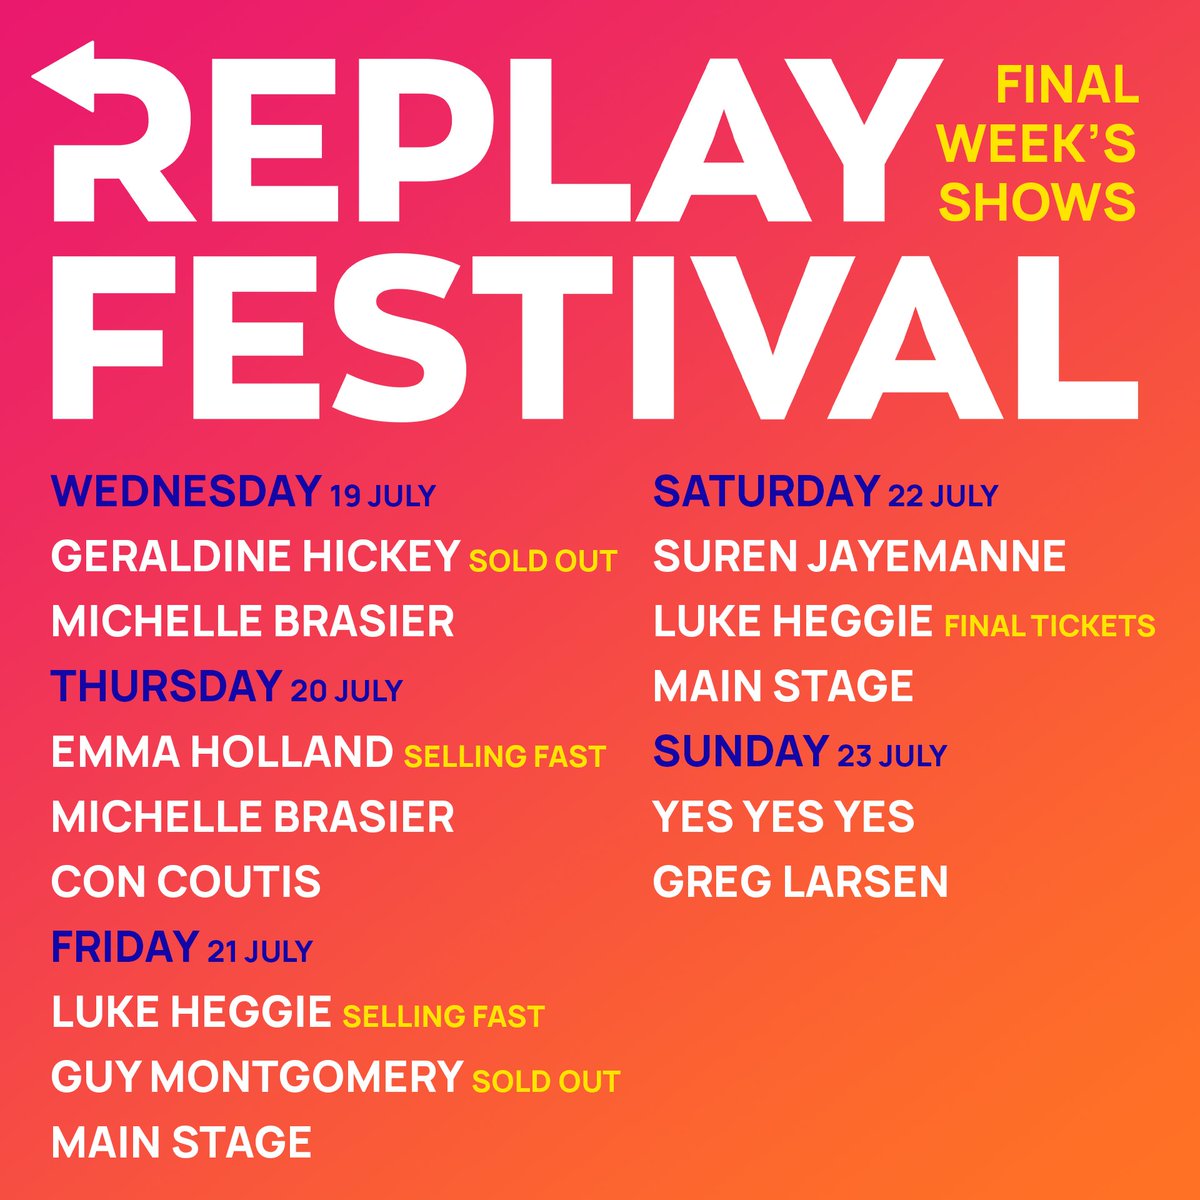 It's the FINAL week of Replay Festival! Don't miss your chance to relive the highlight shows from @michellebrasier @lukeheggie @JayEManne @gregmlarsen @ConCoutis, Emma Holland and more 🤩 Get tickets now at comedyrepublic.com.au